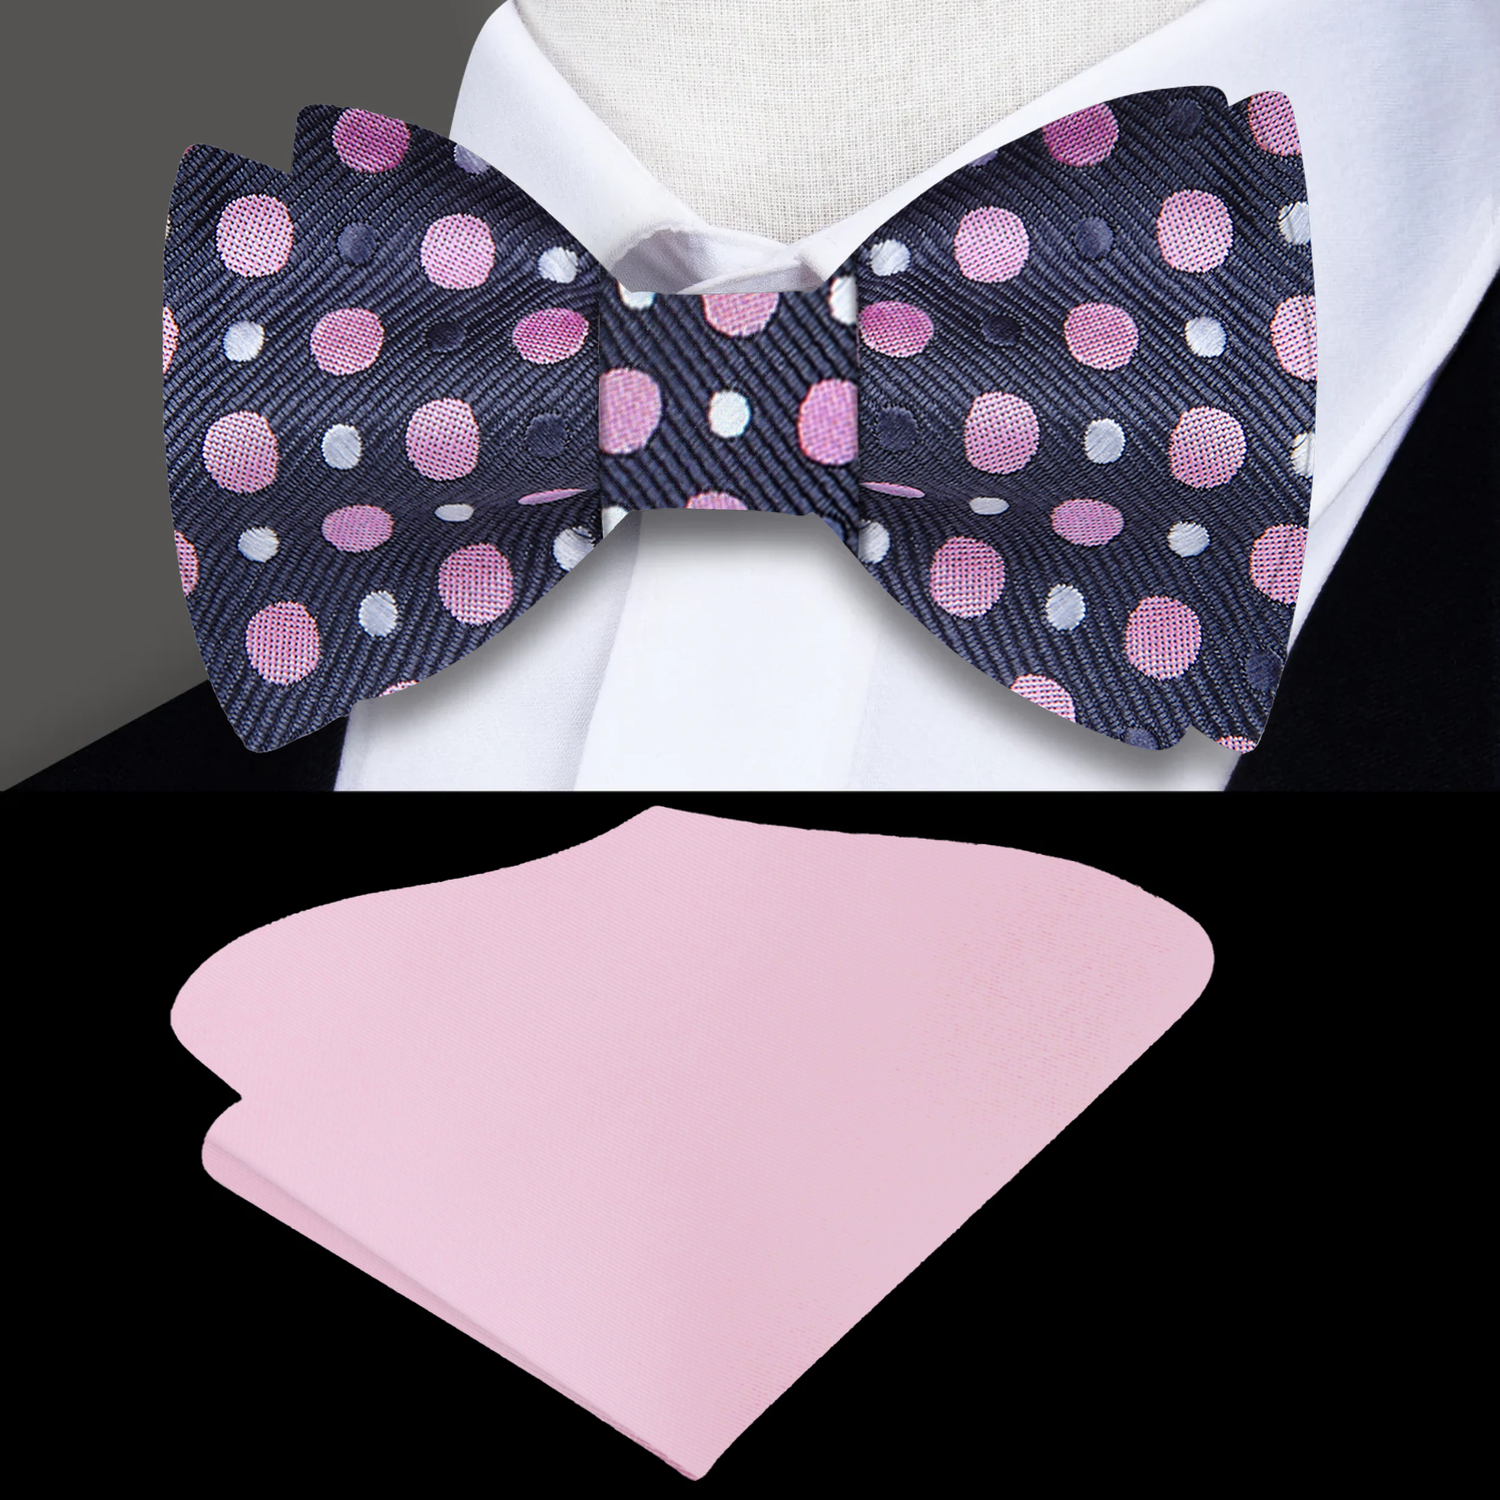 Eloquent Polka Bow Tie